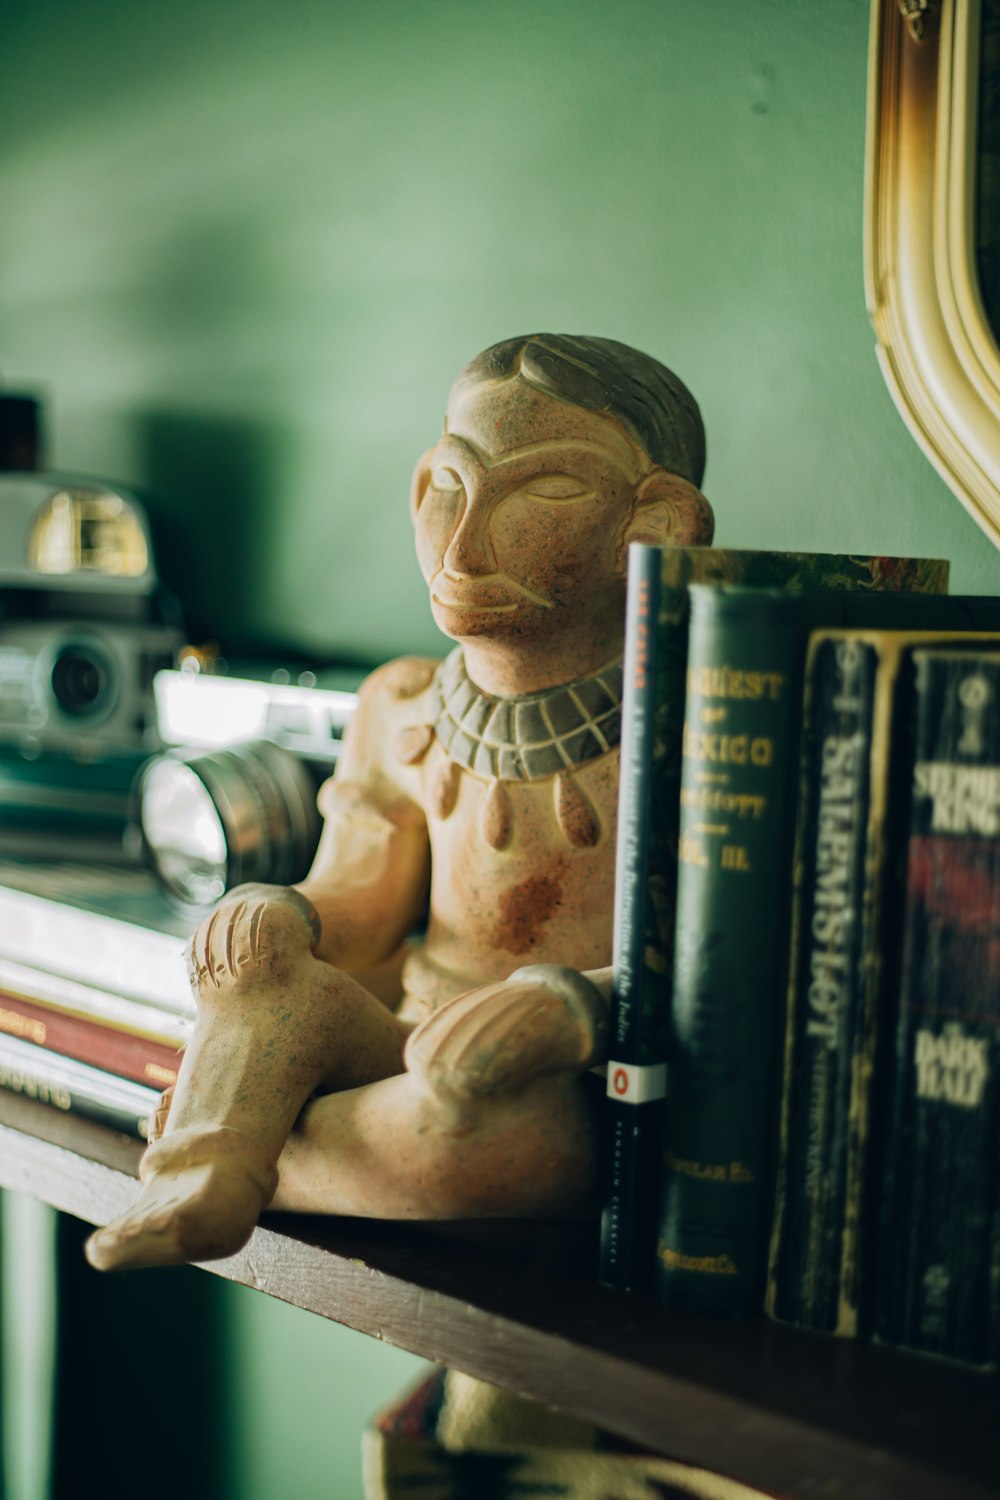 a statue of a person sitting on top of a shelf